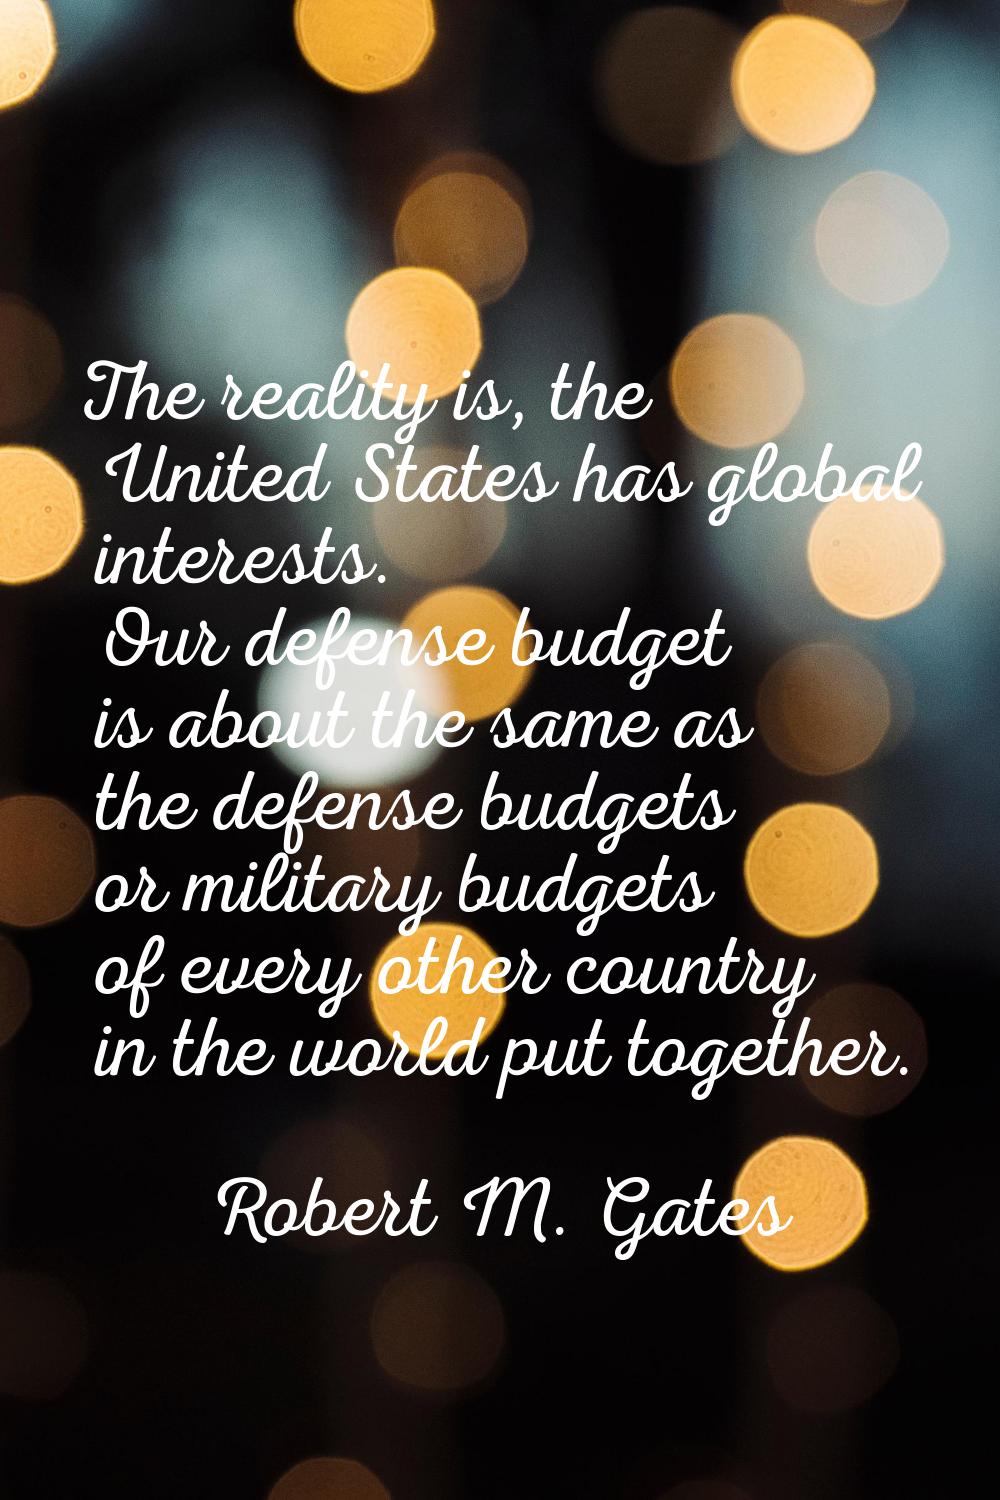 The reality is, the United States has global interests. Our defense budget is about the same as the